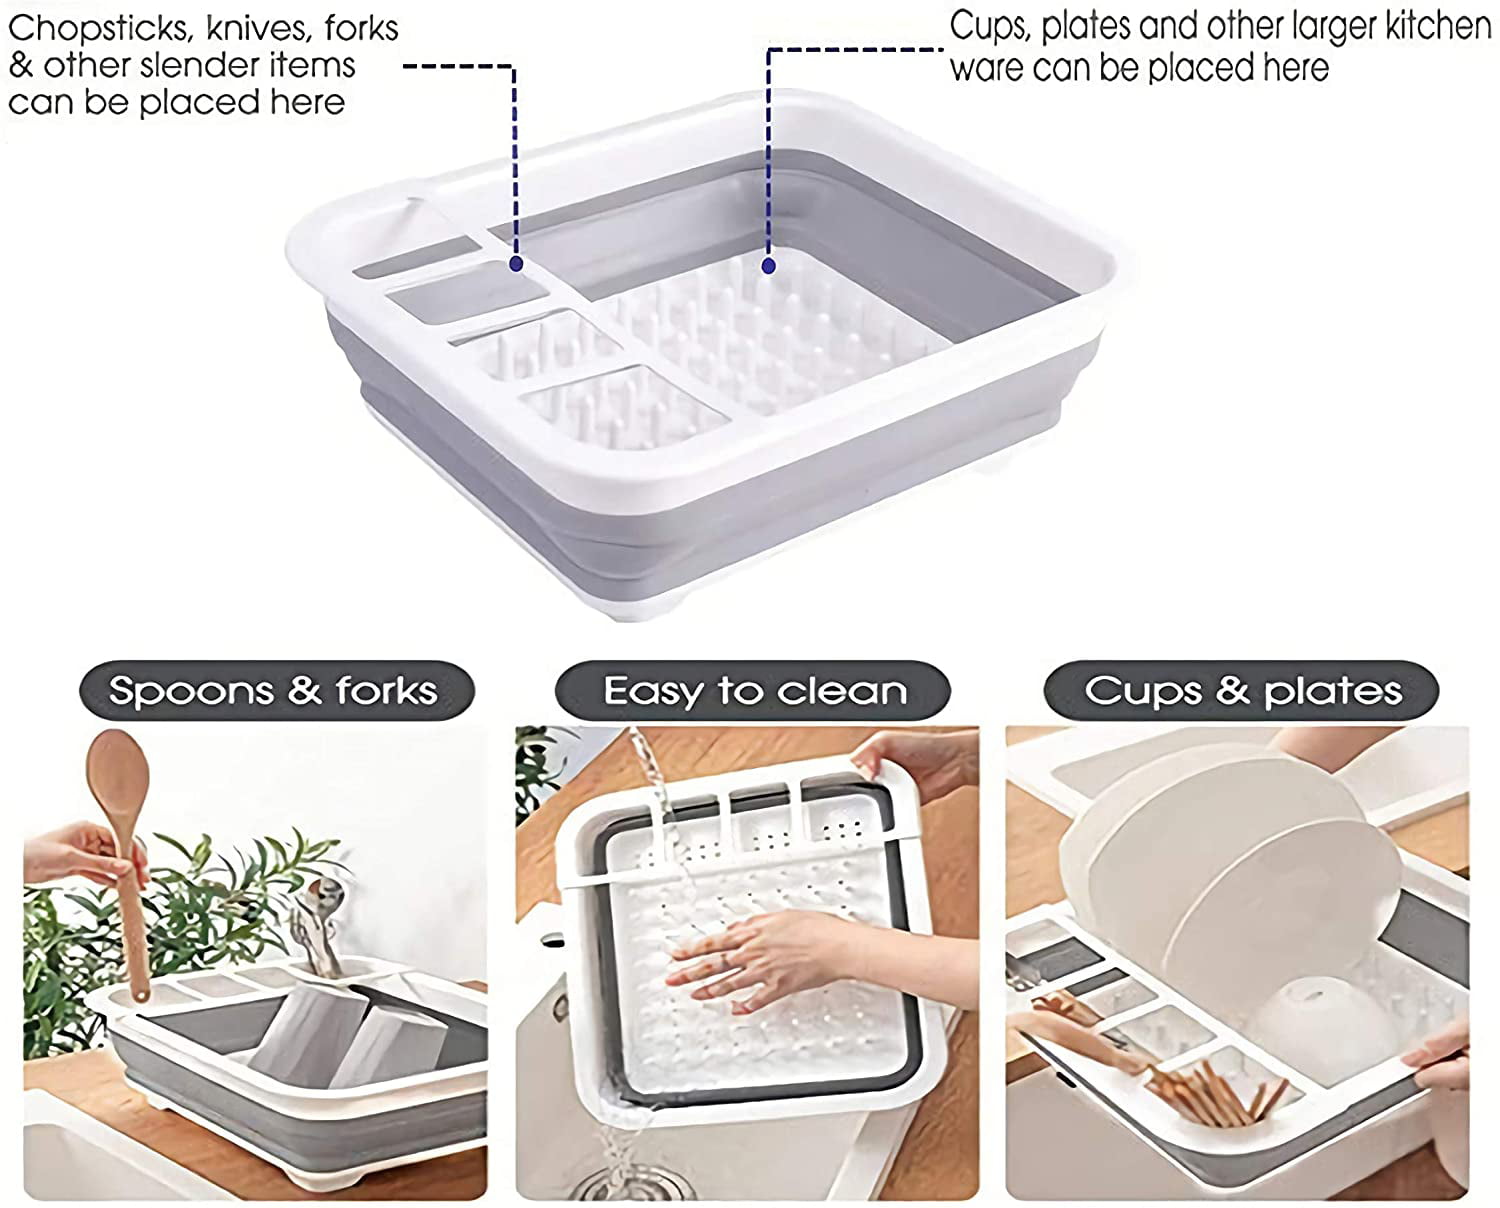 BNYD Plastic Collapsible Dish Drying Rack, Foldable Dinnerware Drainer Organizer for Storage,Kitchen